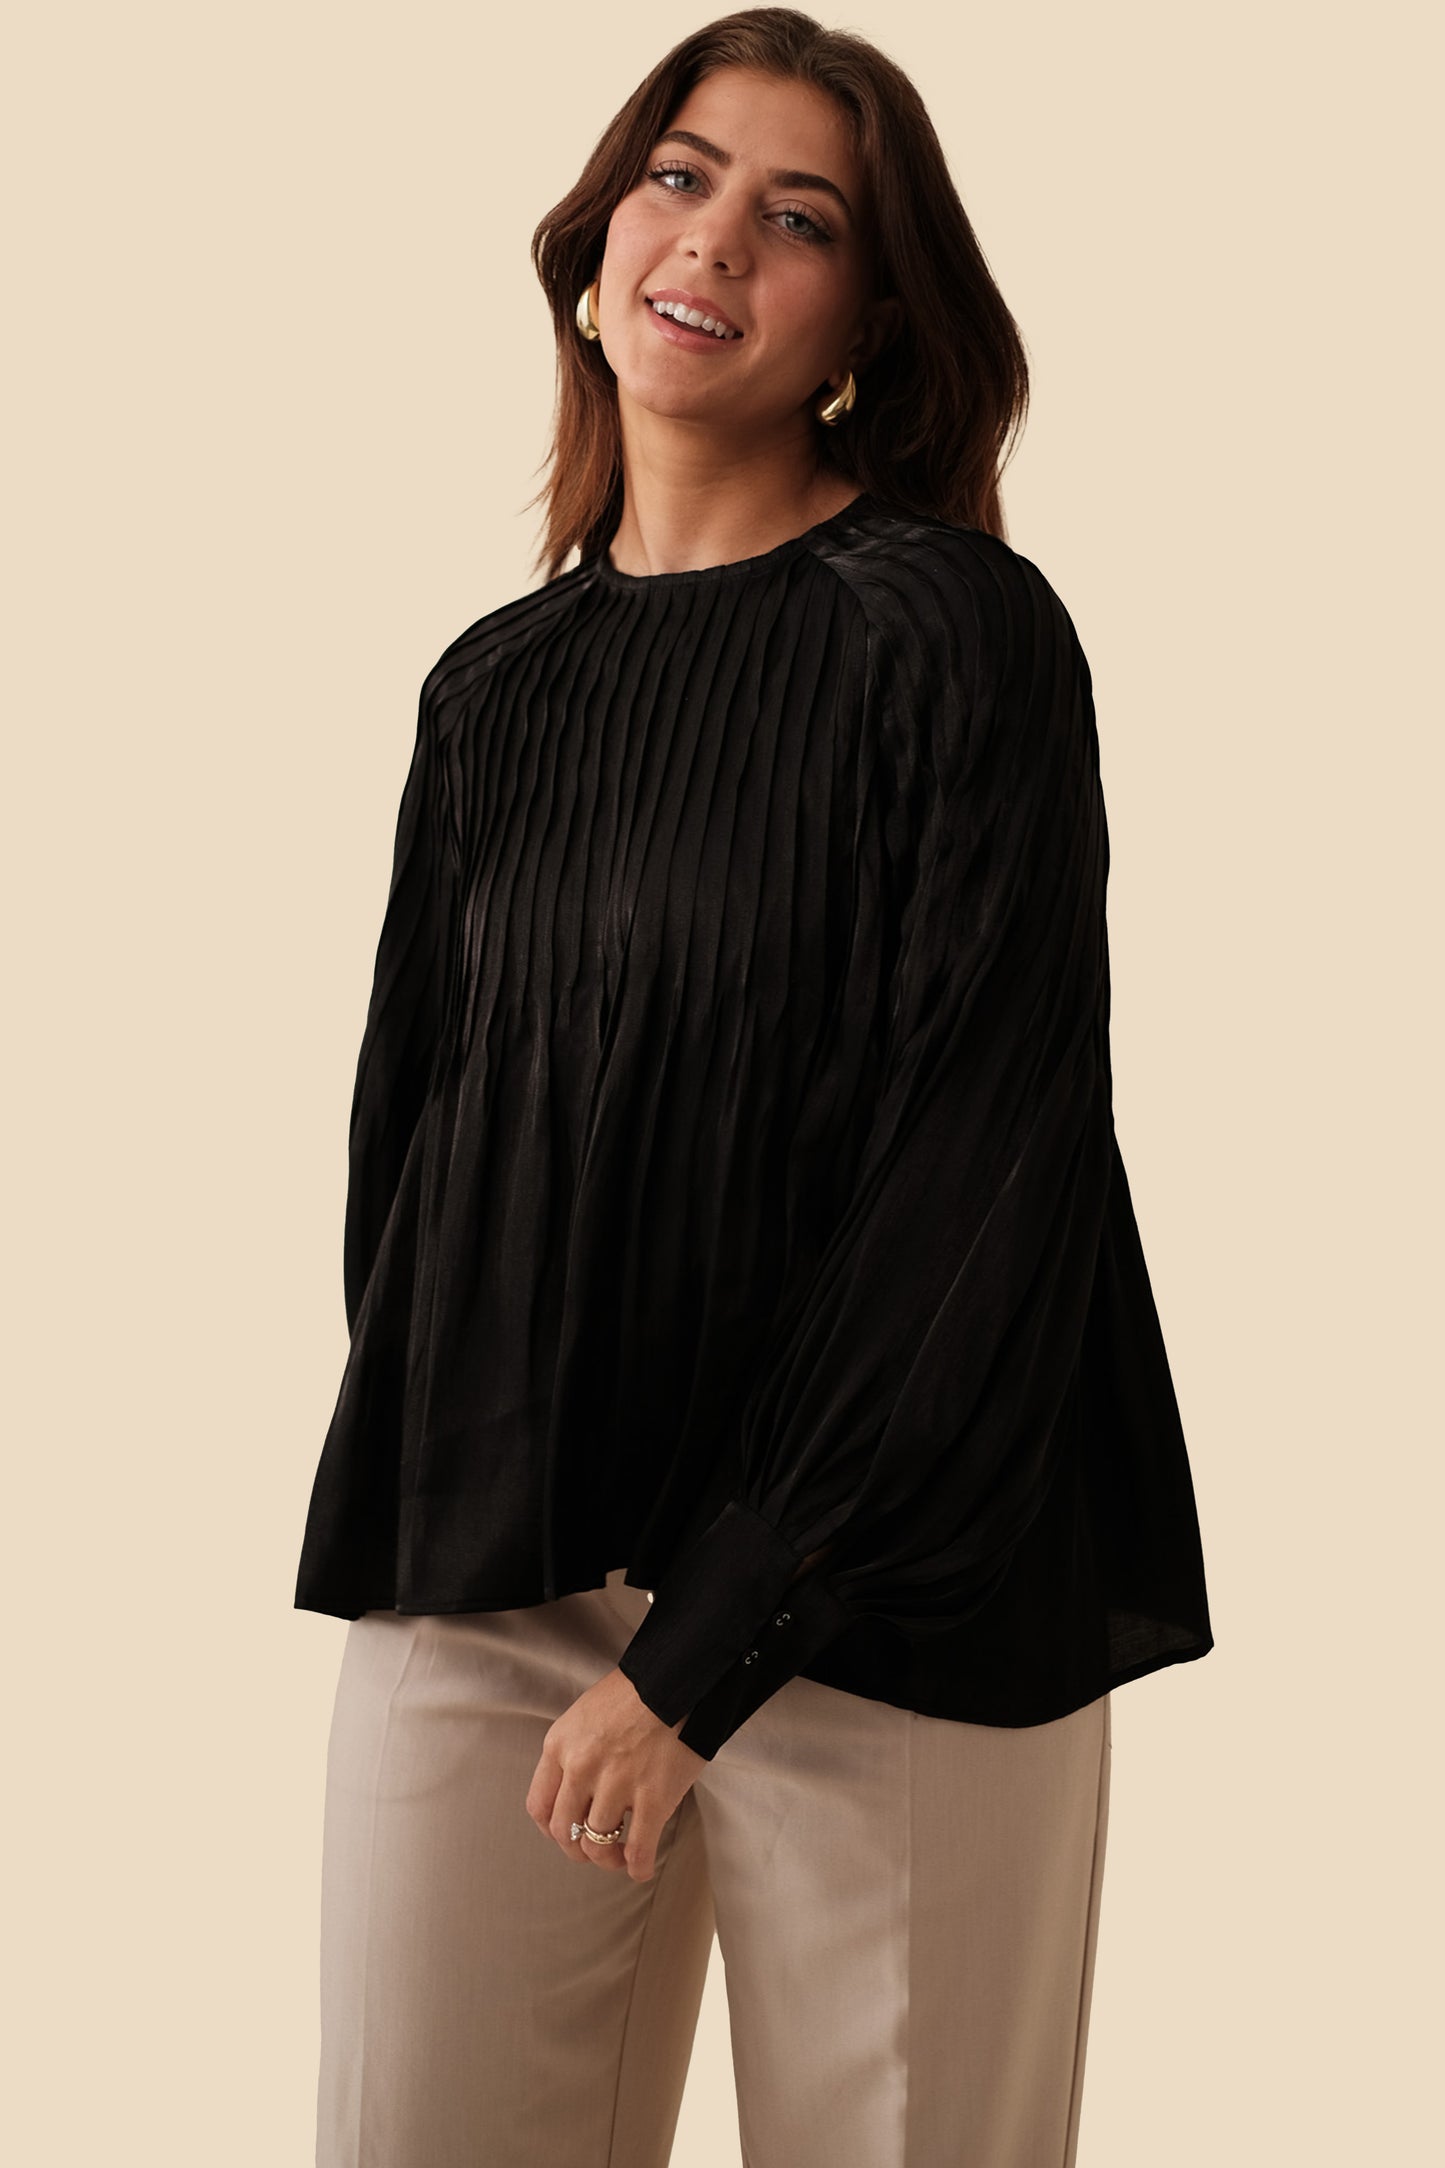 PINCH Brittany Black Satin Crinkle Long Sleeve Top (L)